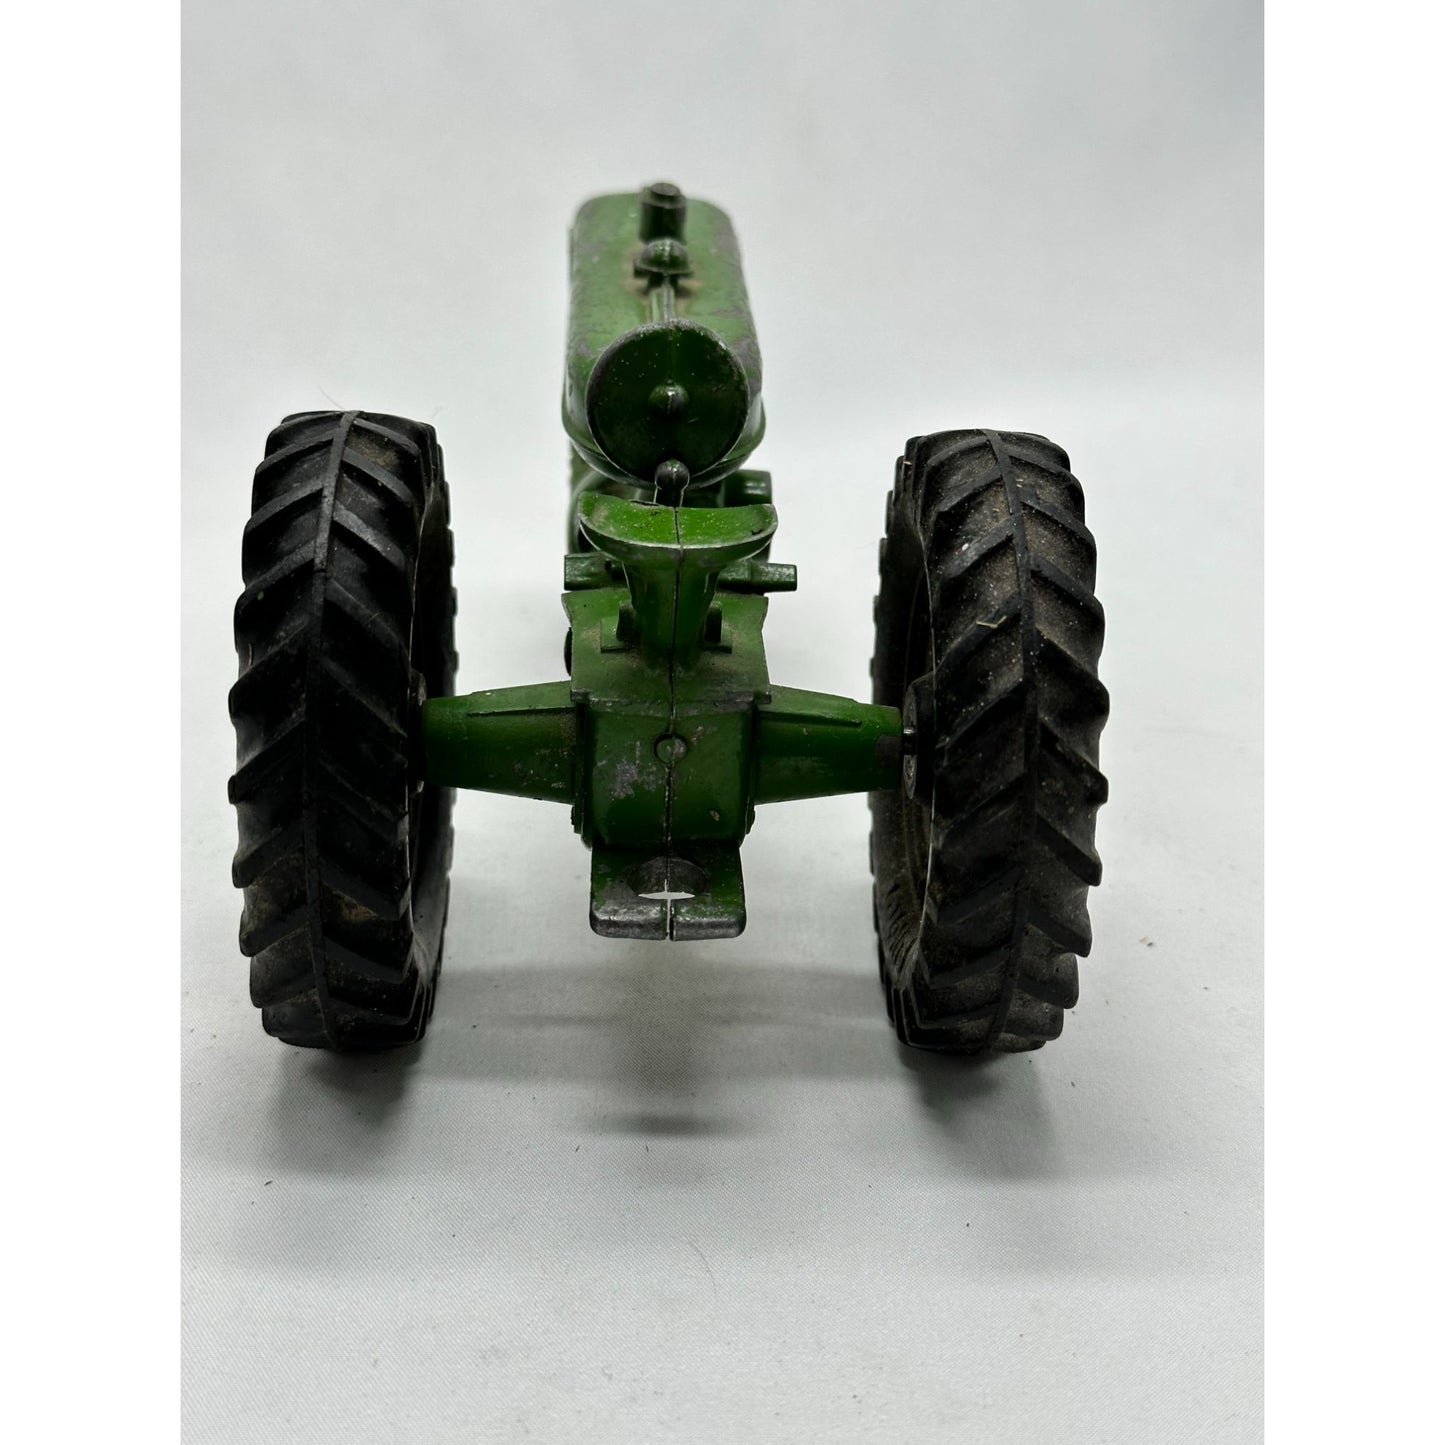 Antique Vintage Diecast Metal Green Farm Tractor Toy Collectible Rare Find